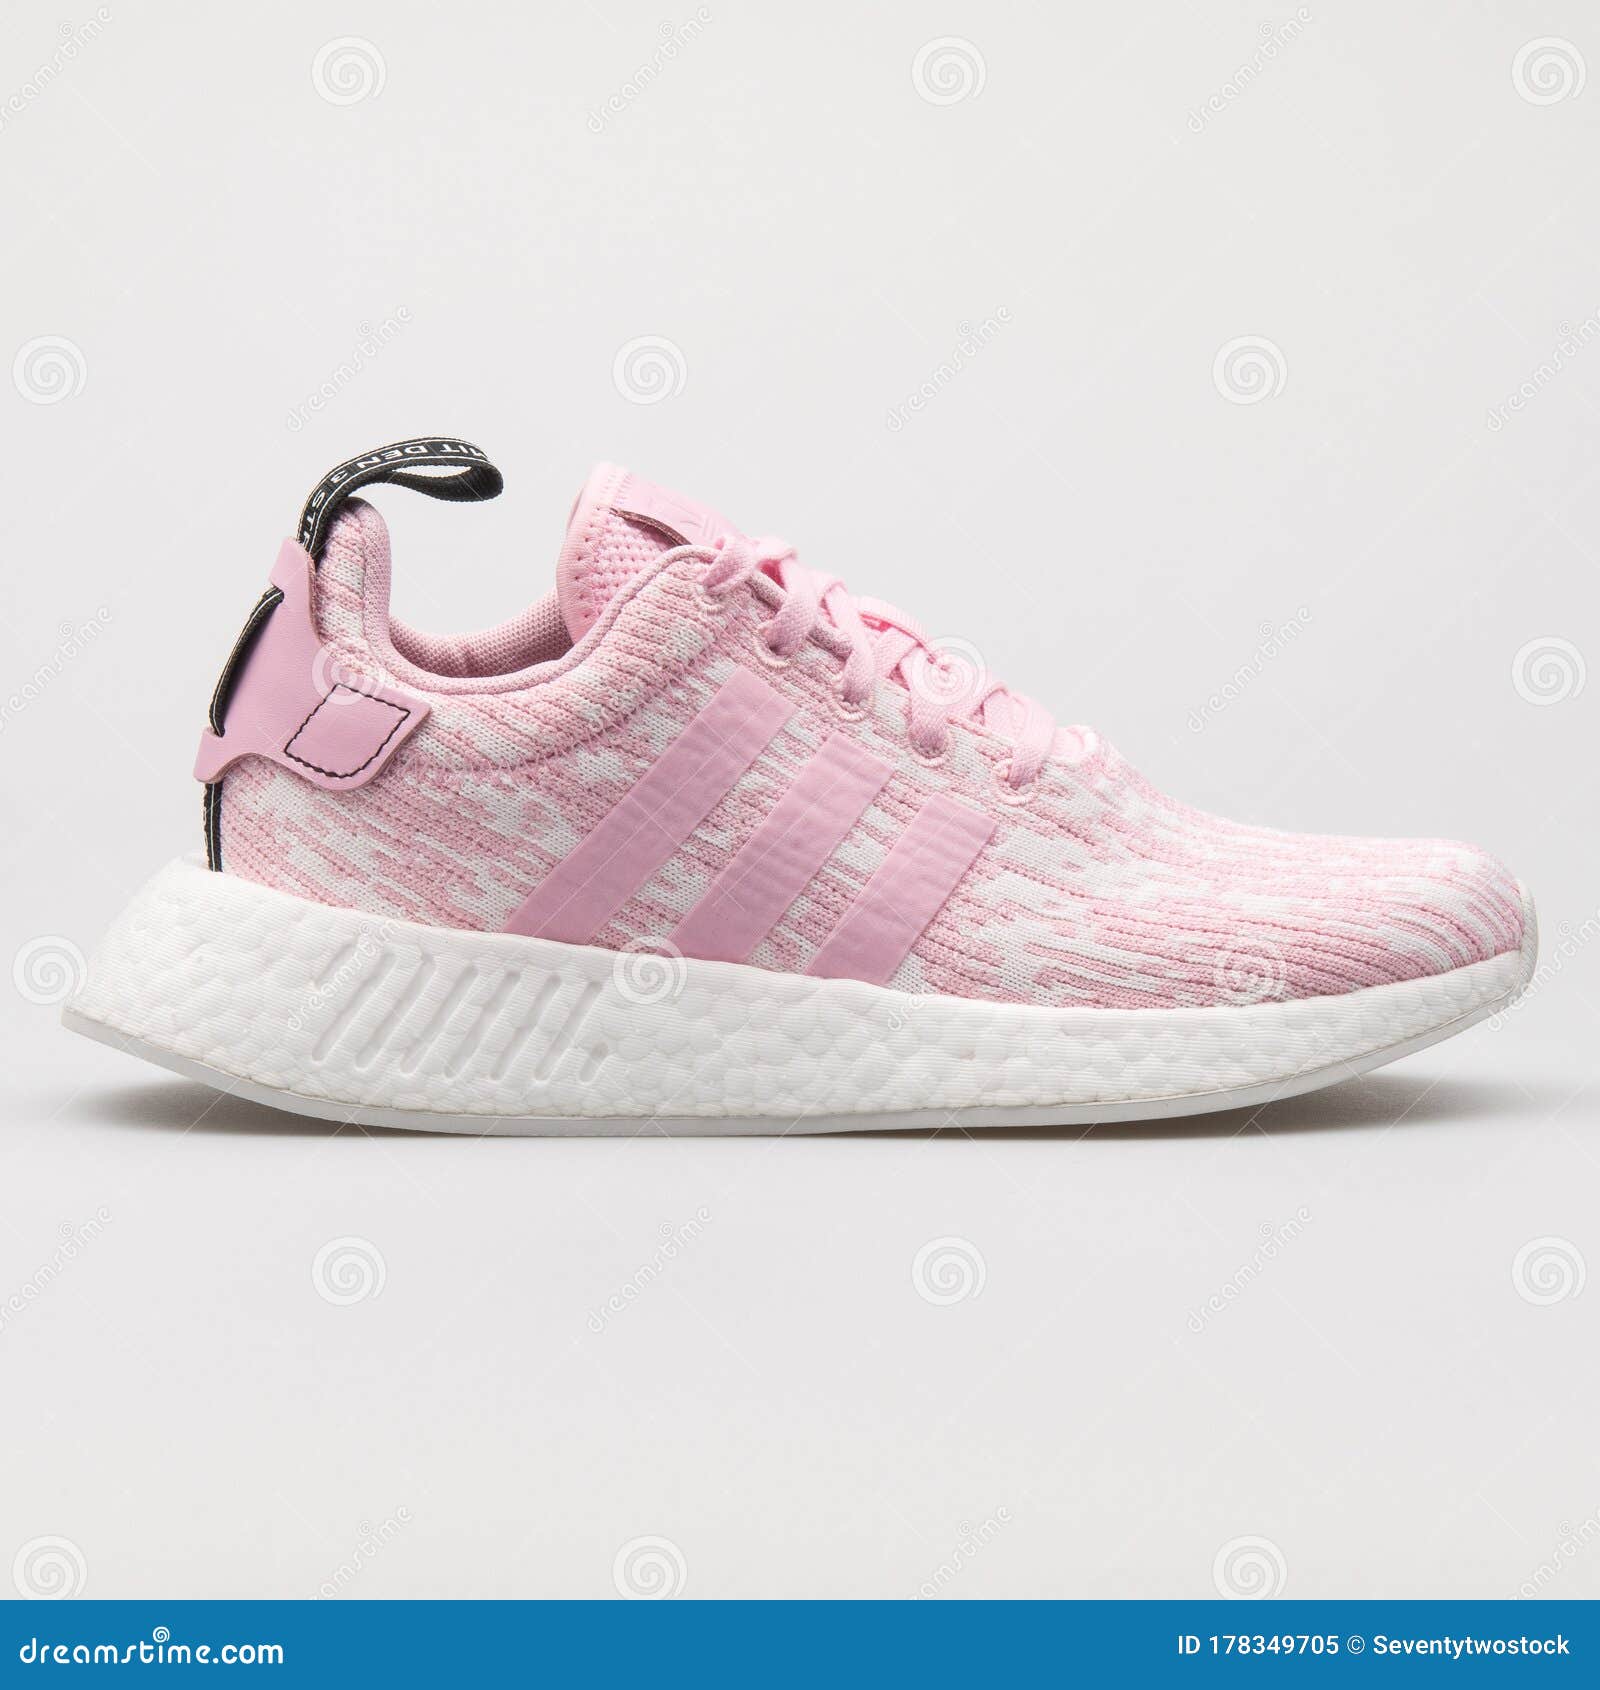 sort Van Bliver værre Adidas NMD R2 Pink and White Sneaker Editorial Image - Image of background,  lifestyle: 178349705